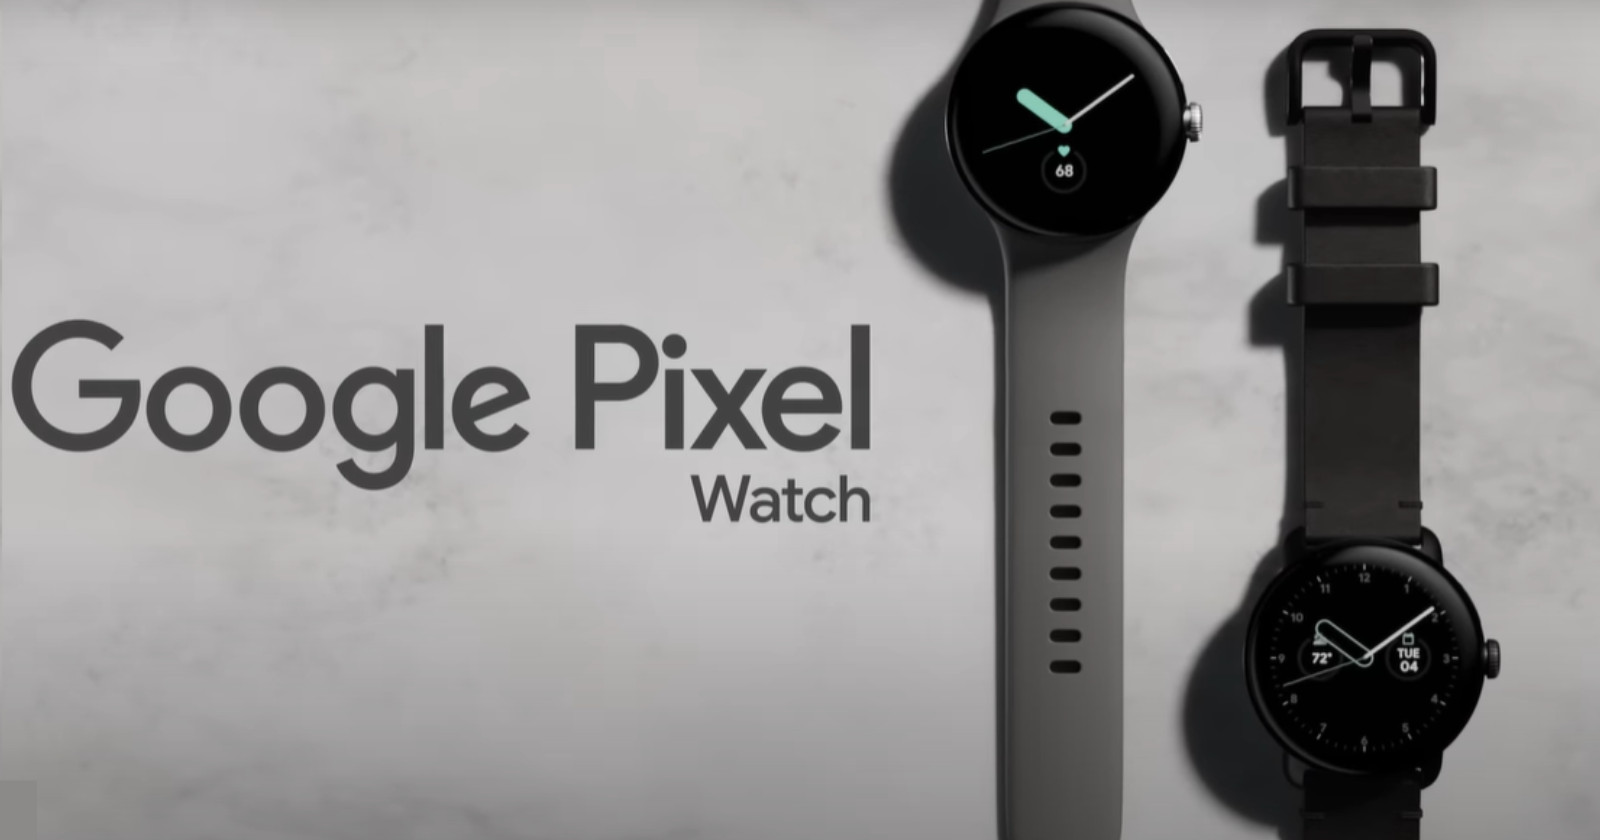 Google Pixel Watch price drops in France: Check out the best offers available